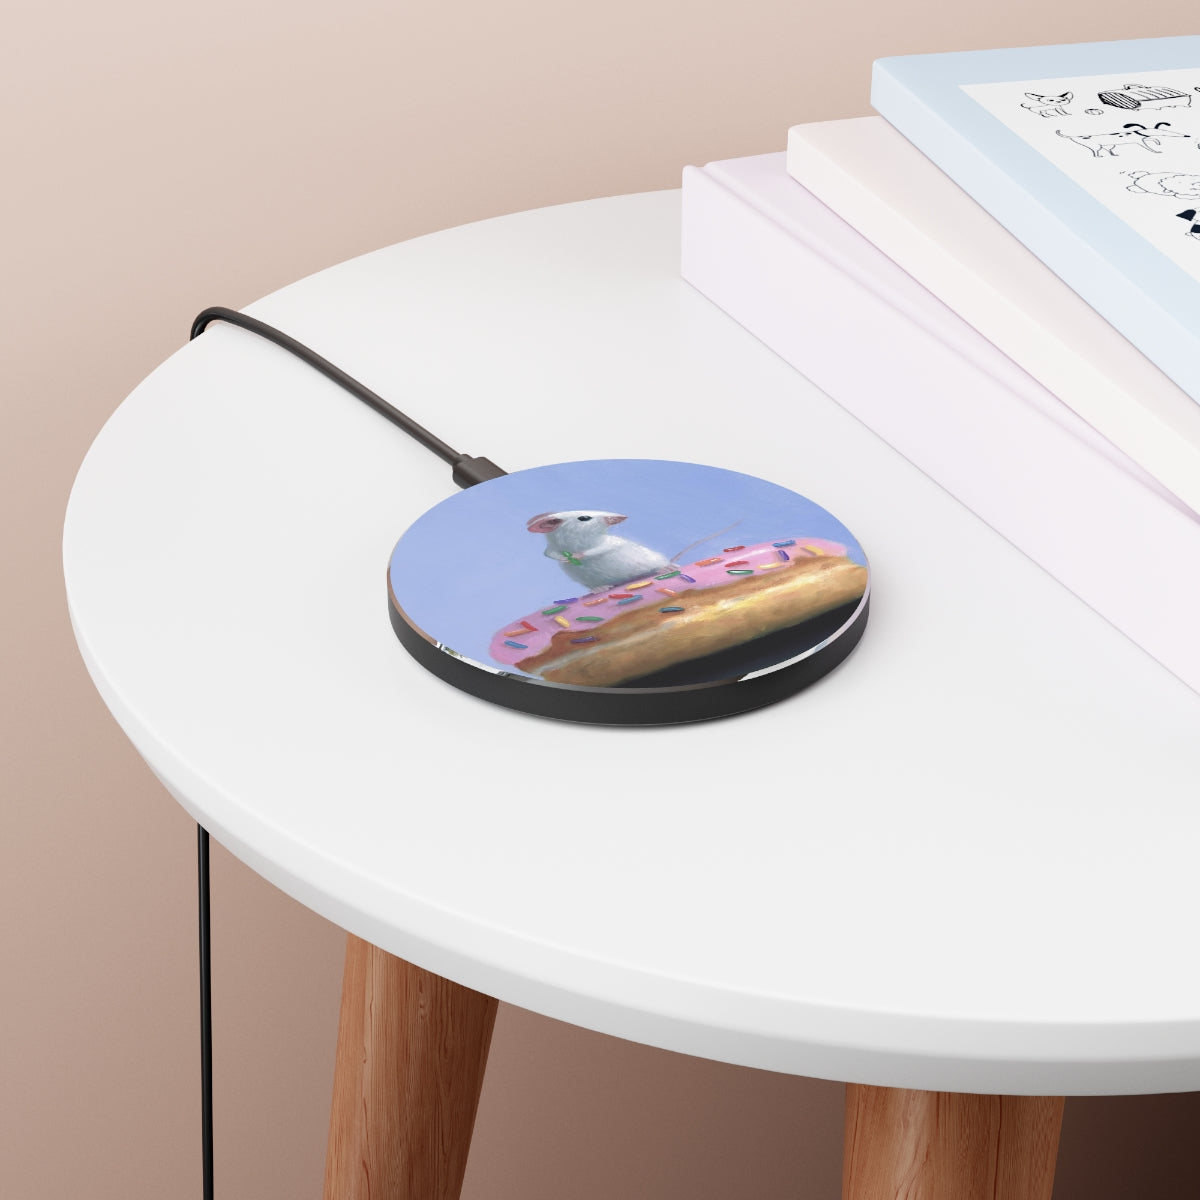 Stuart Dunkel: "Conquered Donut" Wireless Charger